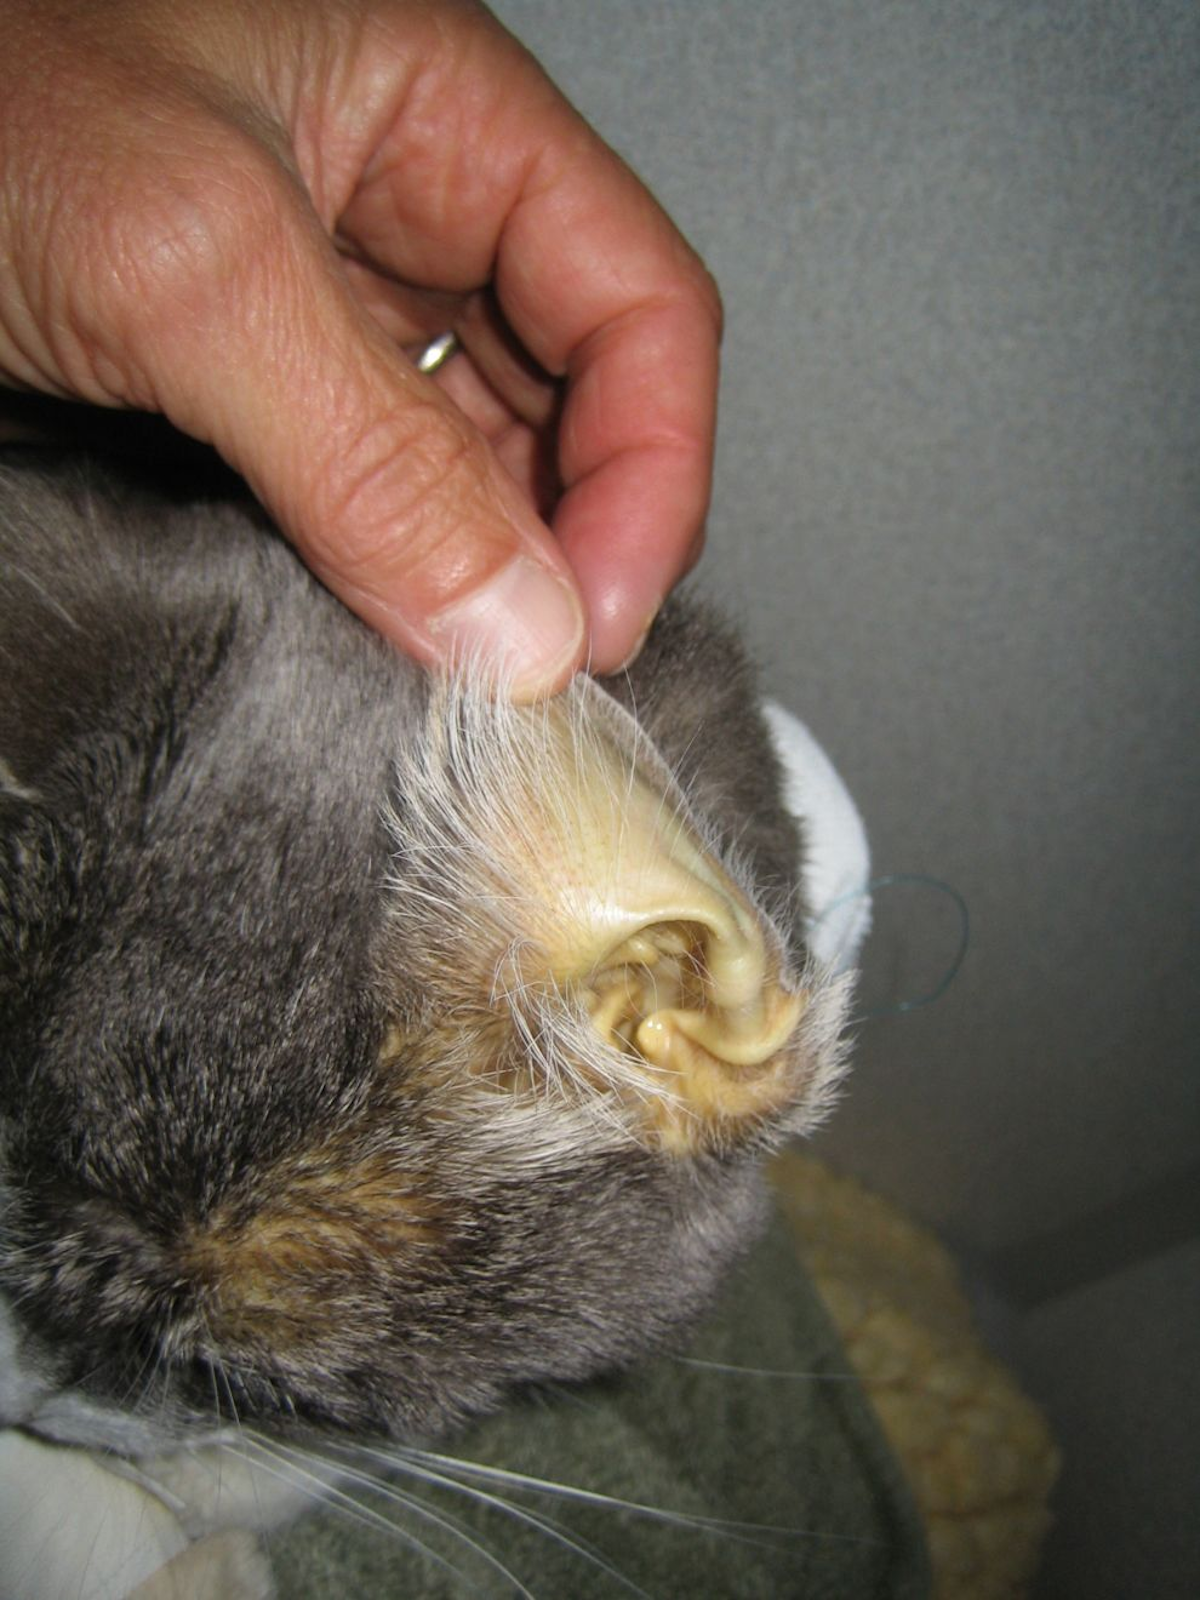 A yellowish tinge to a cat’s pinna may be the first sign of jaundice, but the yellow coloration does not automatically indicate liver disease.